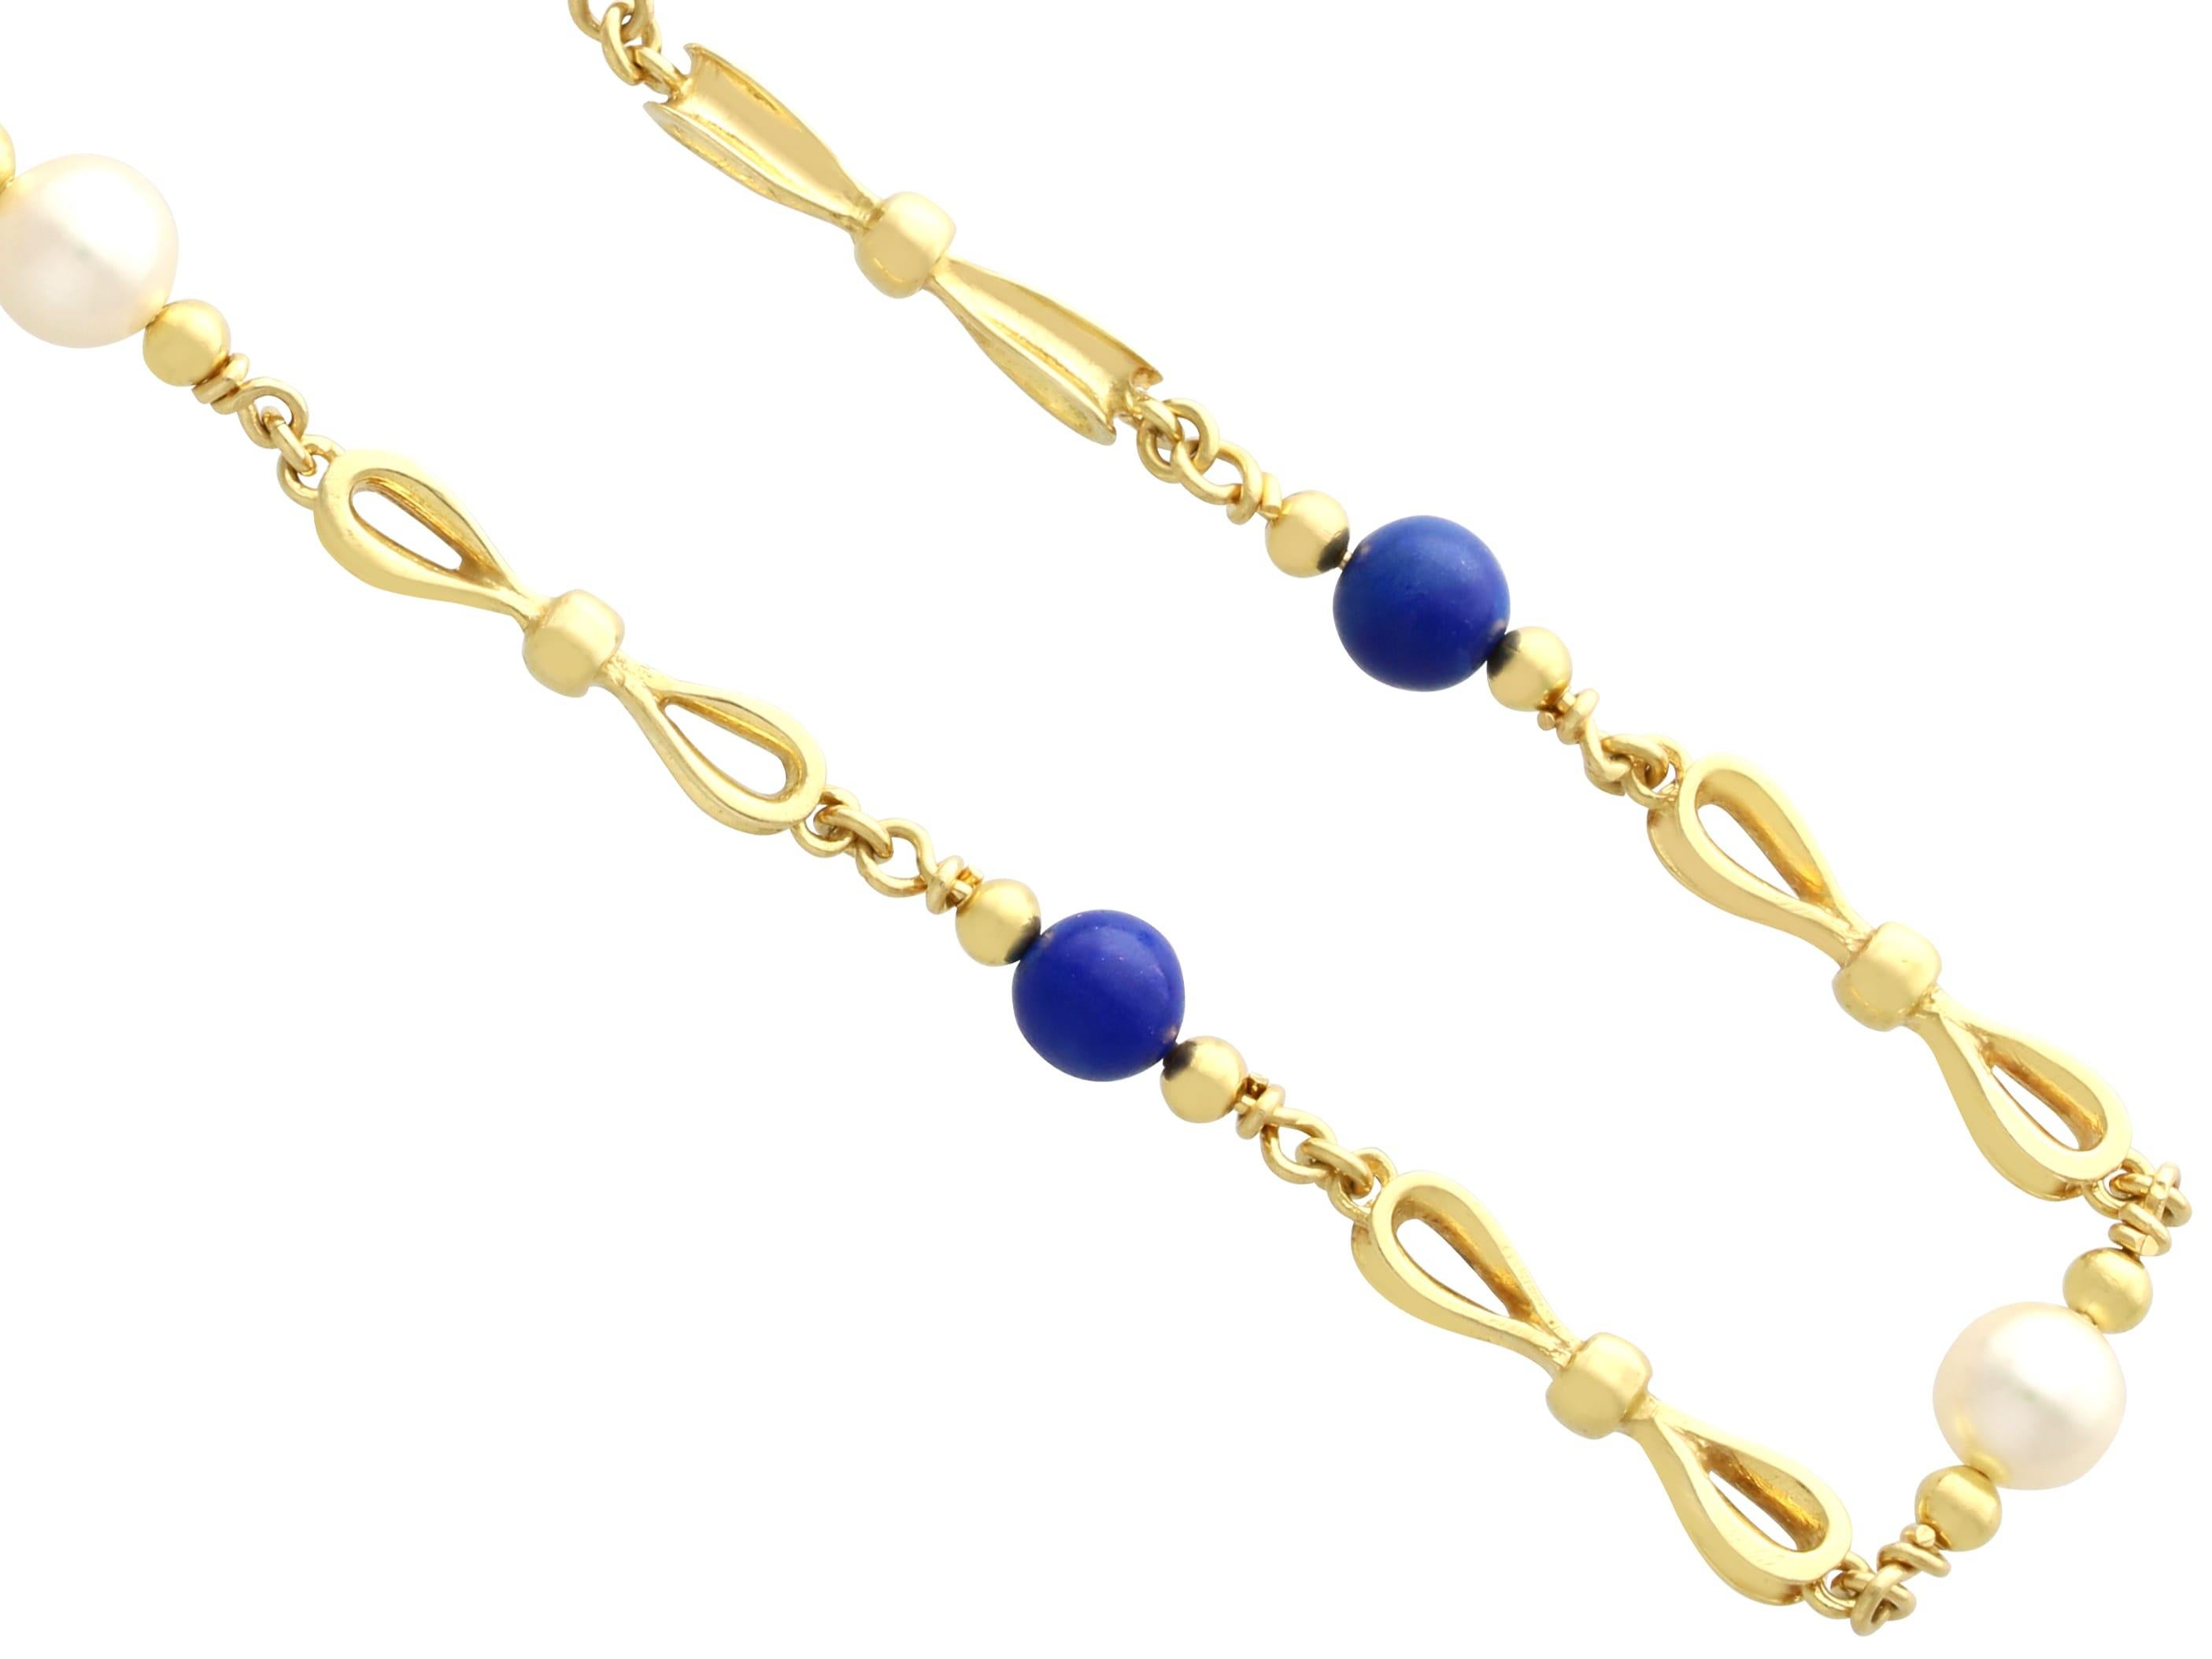 Vintage 7.80 Carat Lapis Lazuli  Pearl Chain Necklace in 18k Yellow Gold In Excellent Condition For Sale In Jesmond, Newcastle Upon Tyne